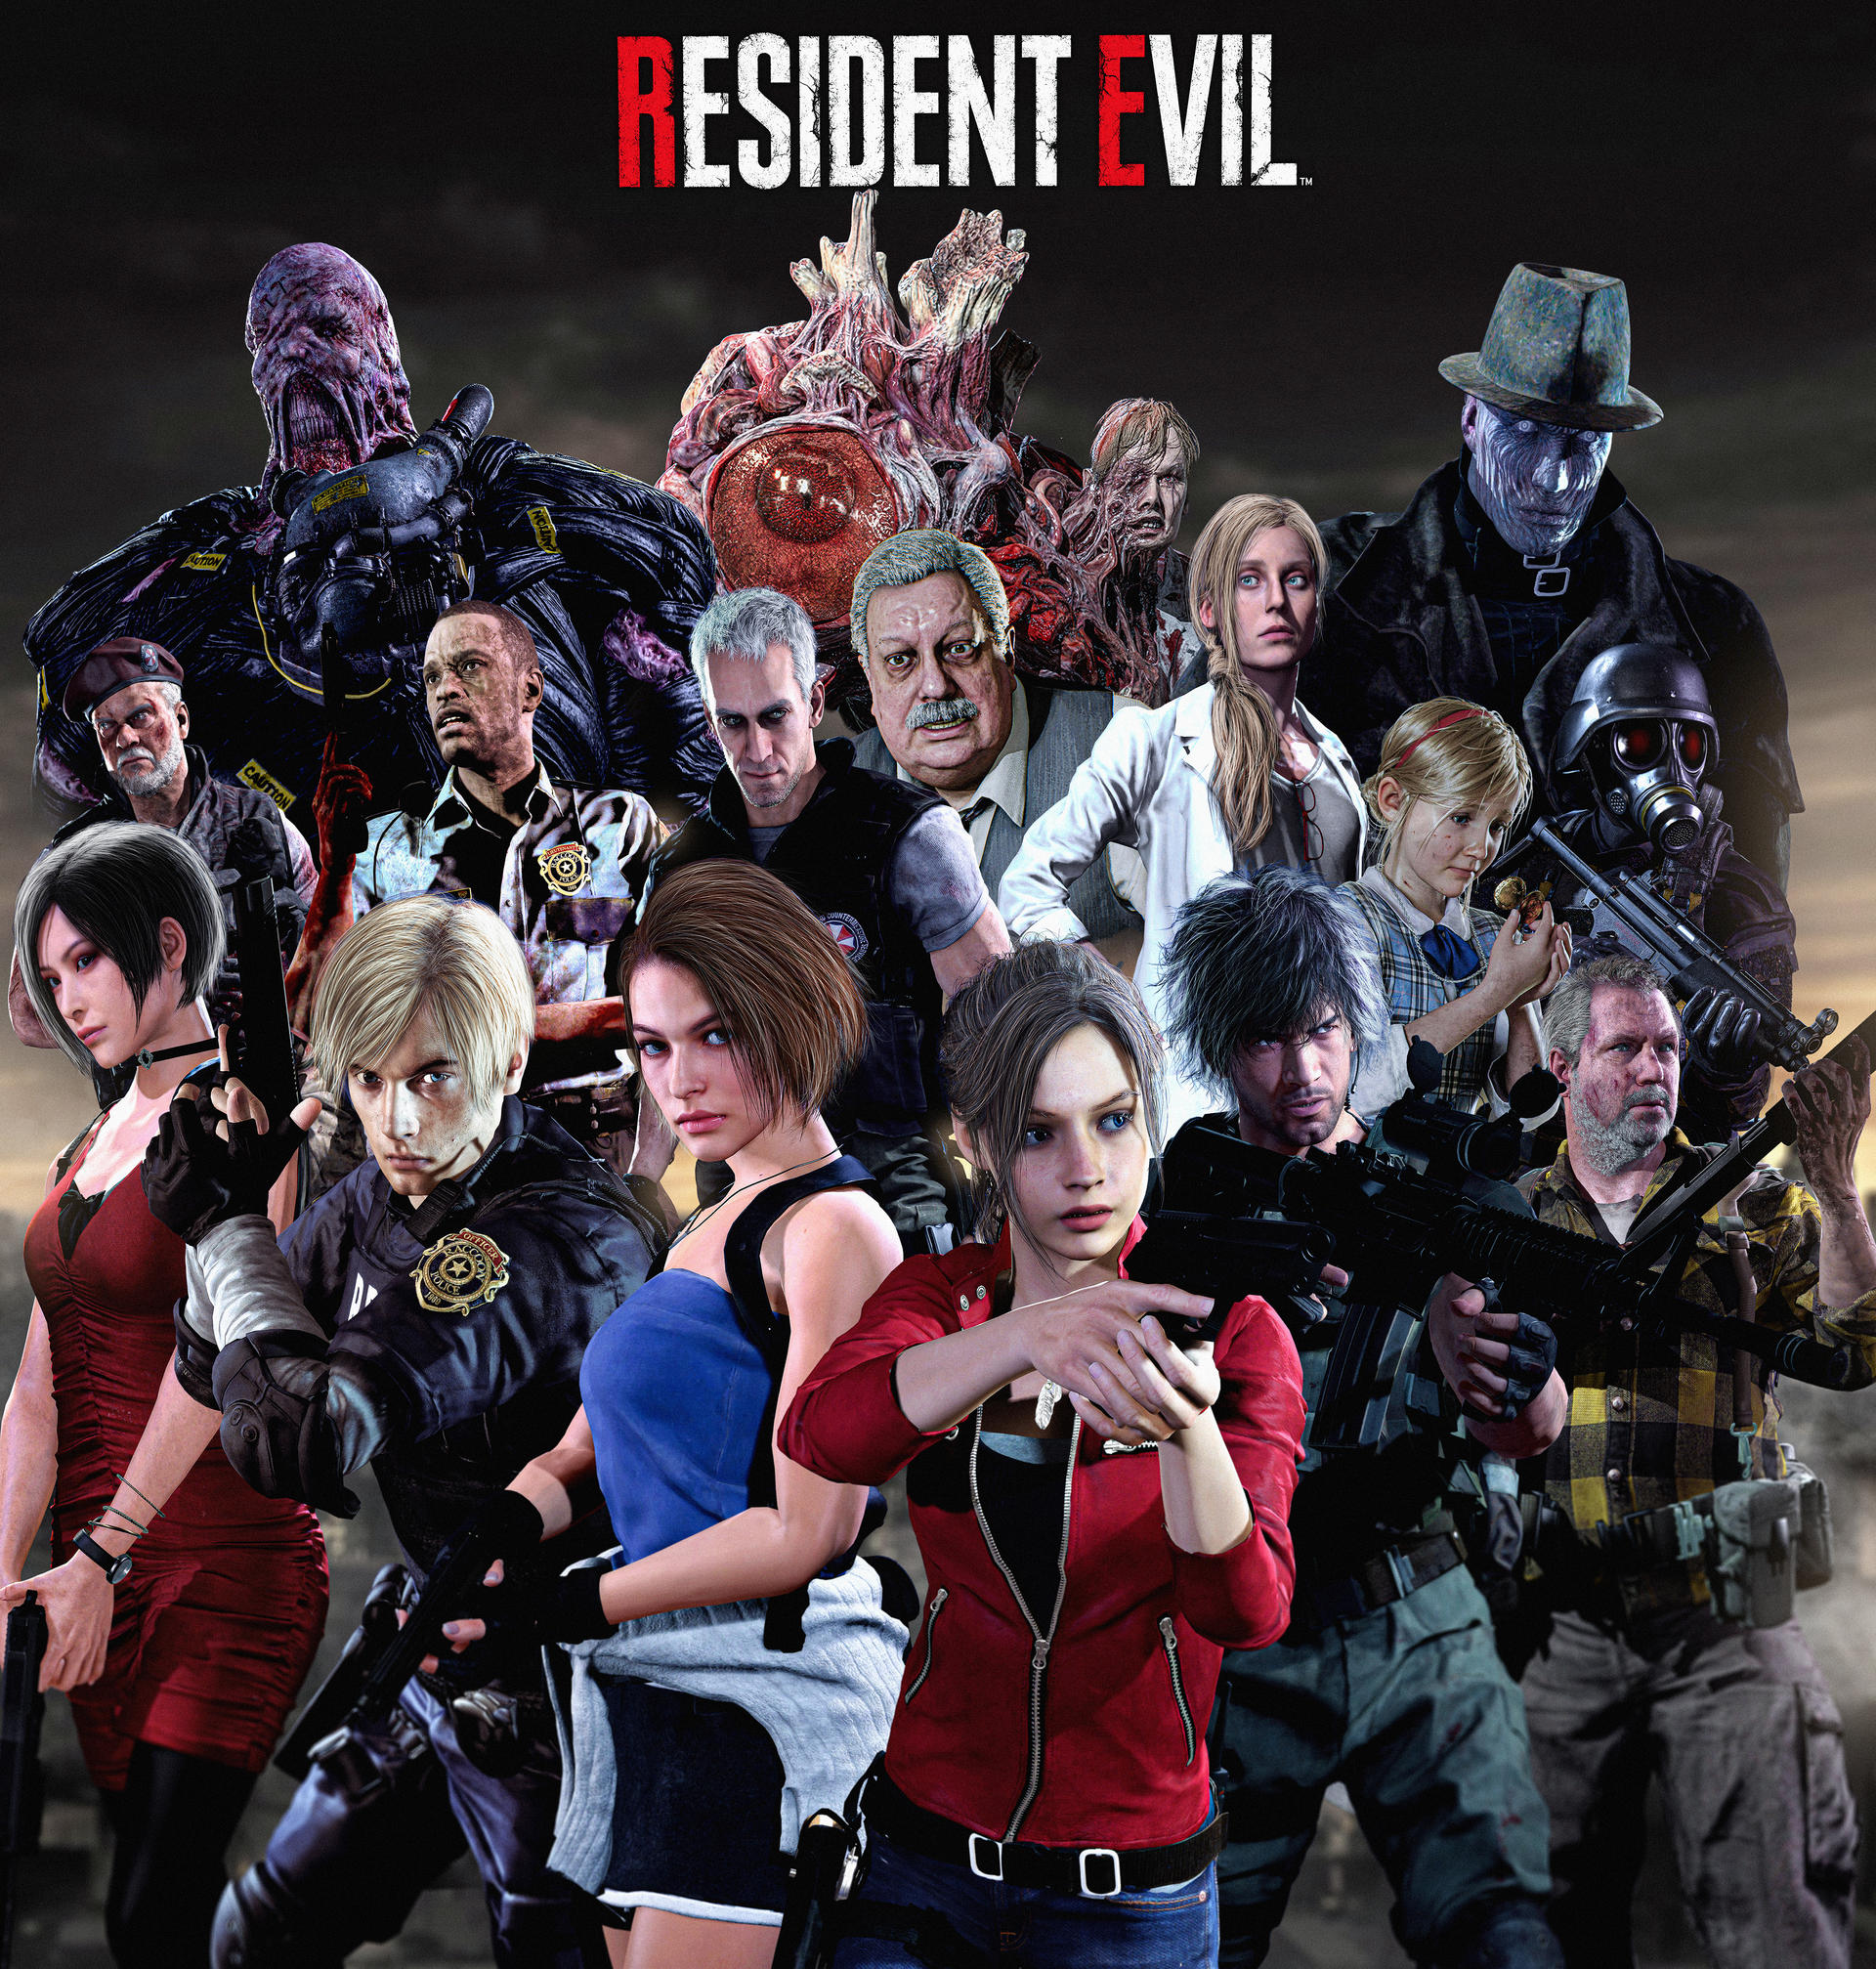 Resident Evil - The Raccoon City Remake by LordHayabusa357 on DeviantArt